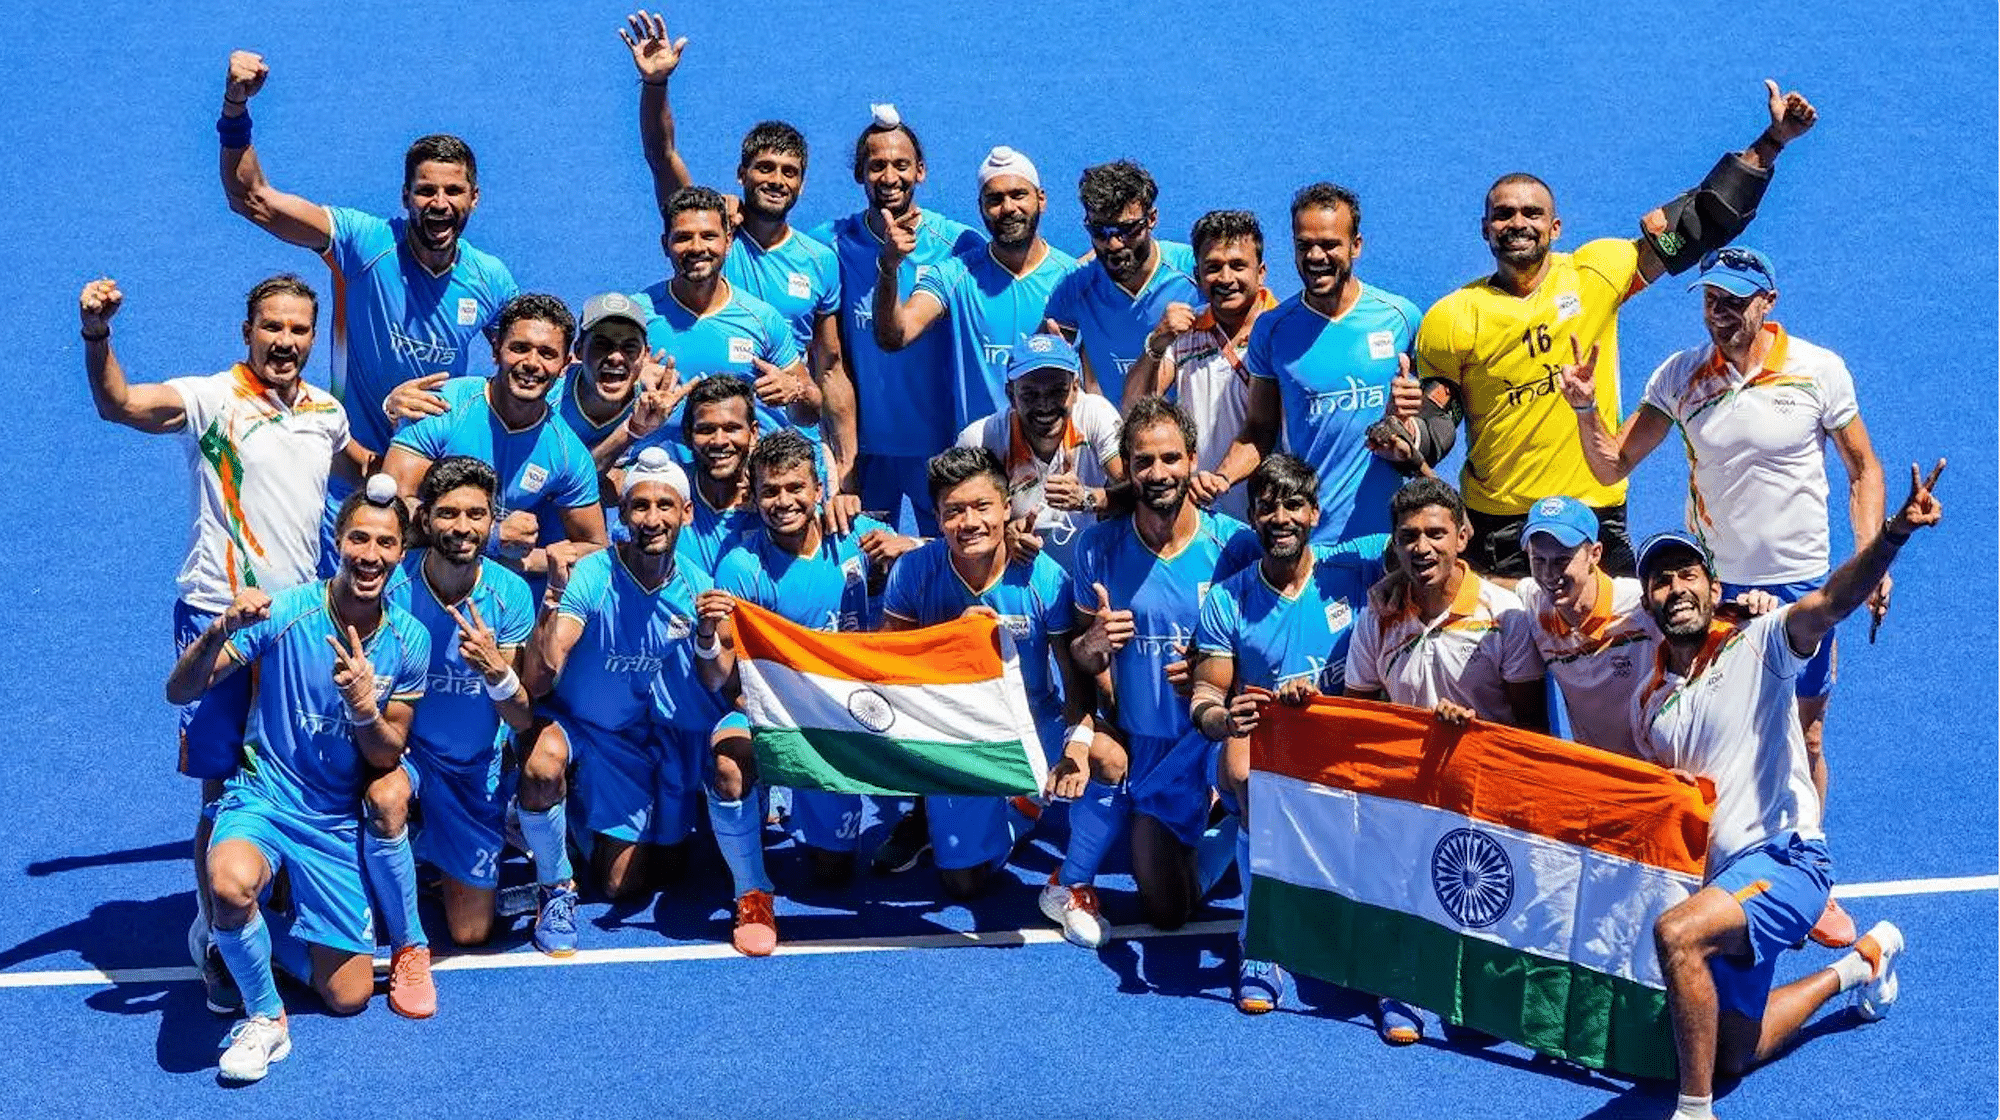 FIH Hockey World Cup 2023 India vs Spain Live Streaming - When and Where To Watch the Live Telecast